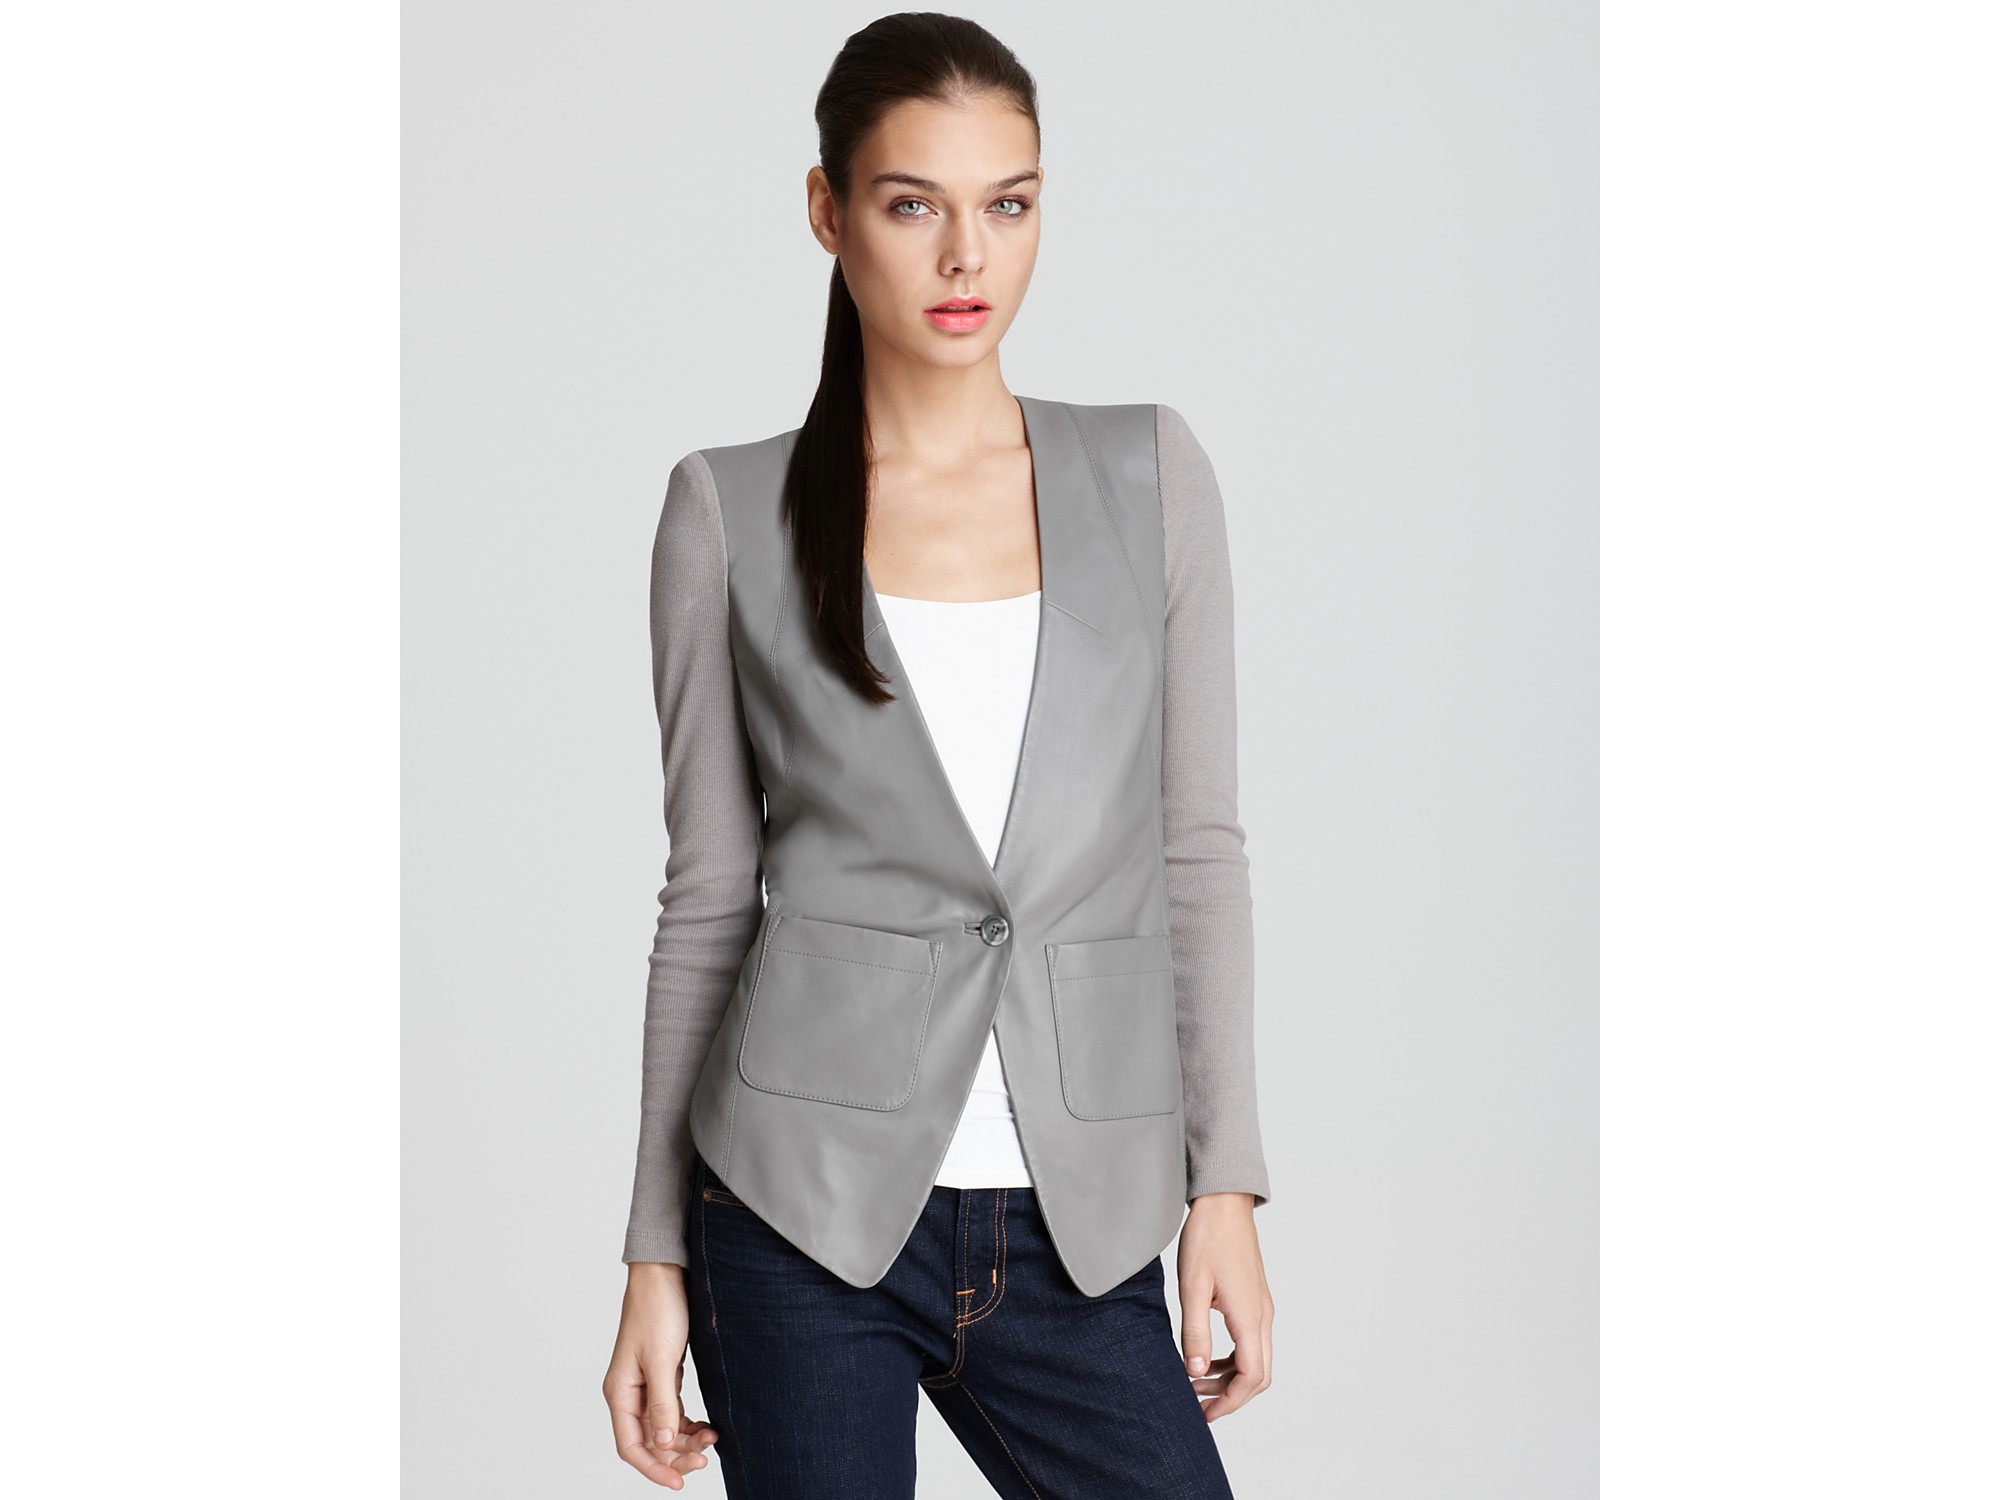 Lyst - Cut25 By Yigal Azrouël Jacket Leather with Ribbed Sleeves in Gray